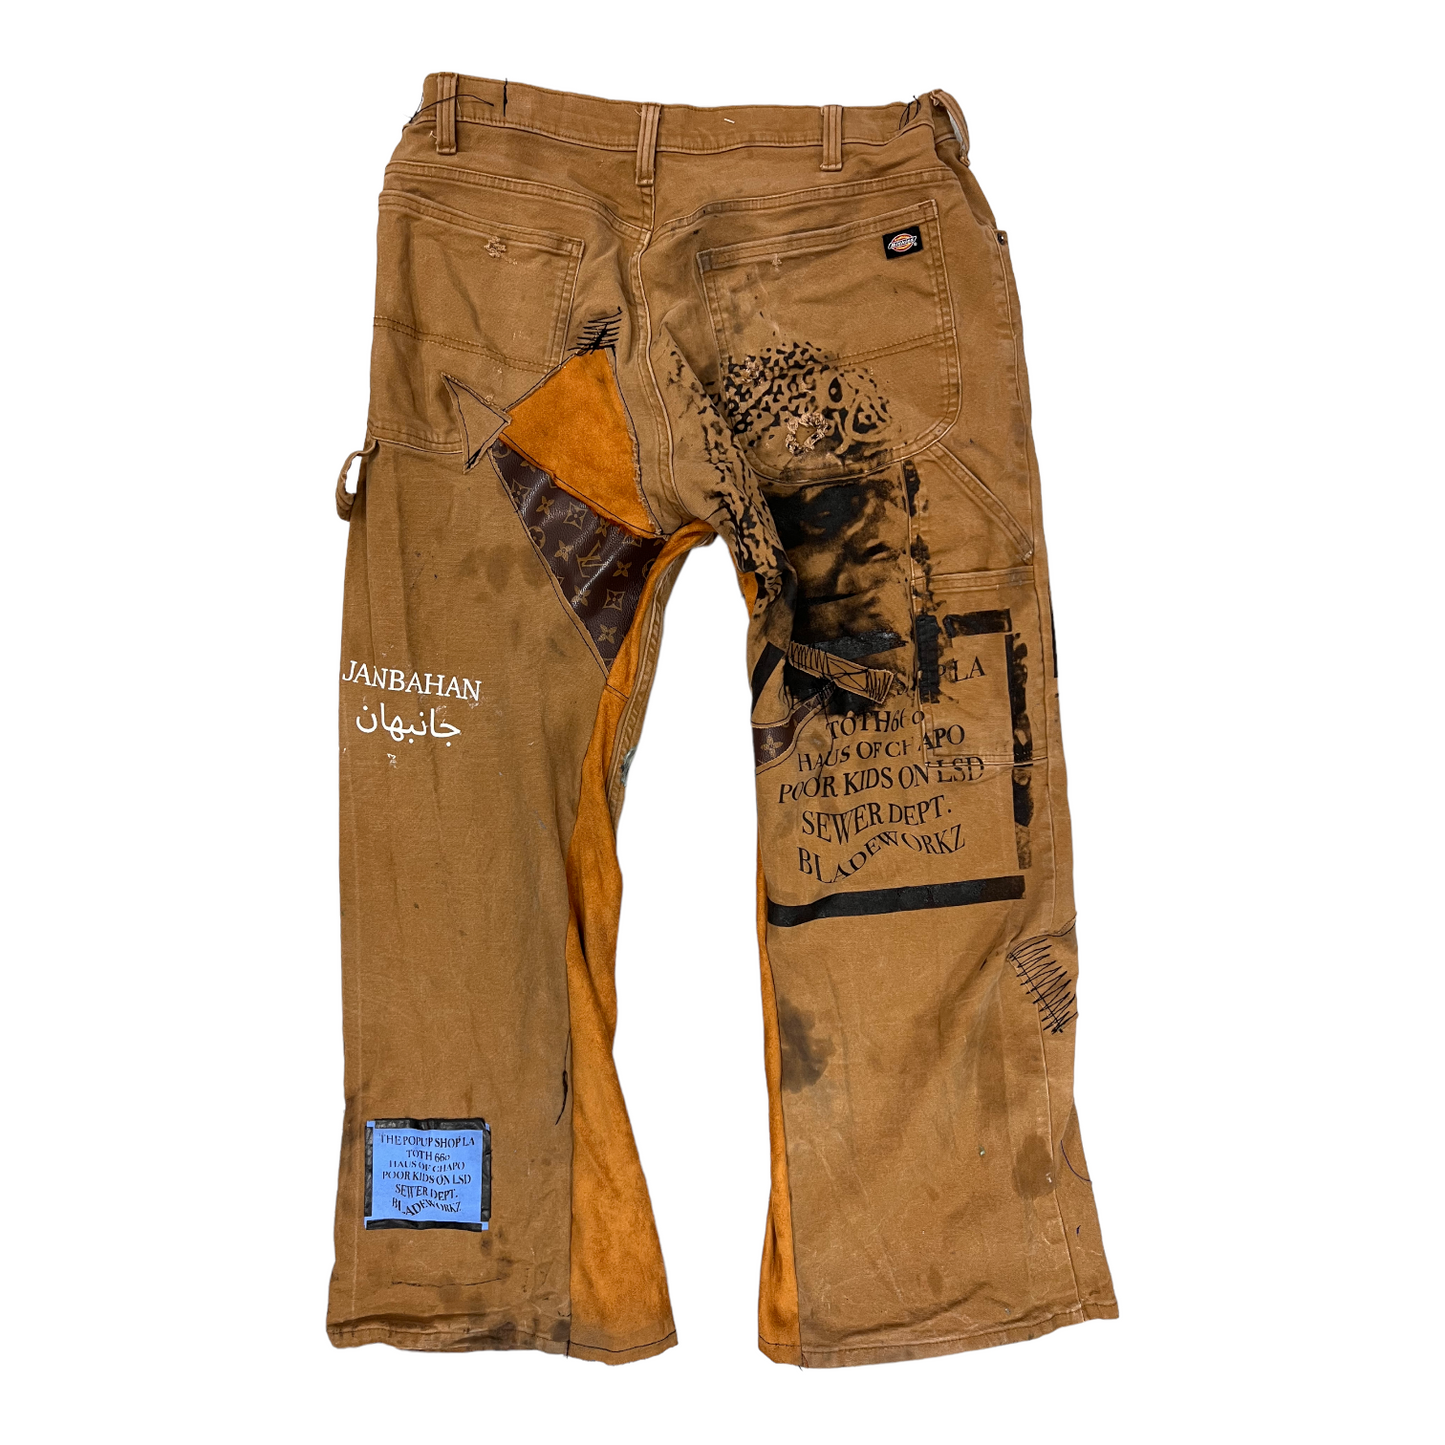 Sewer Dept. Patched and flared brown Dickies